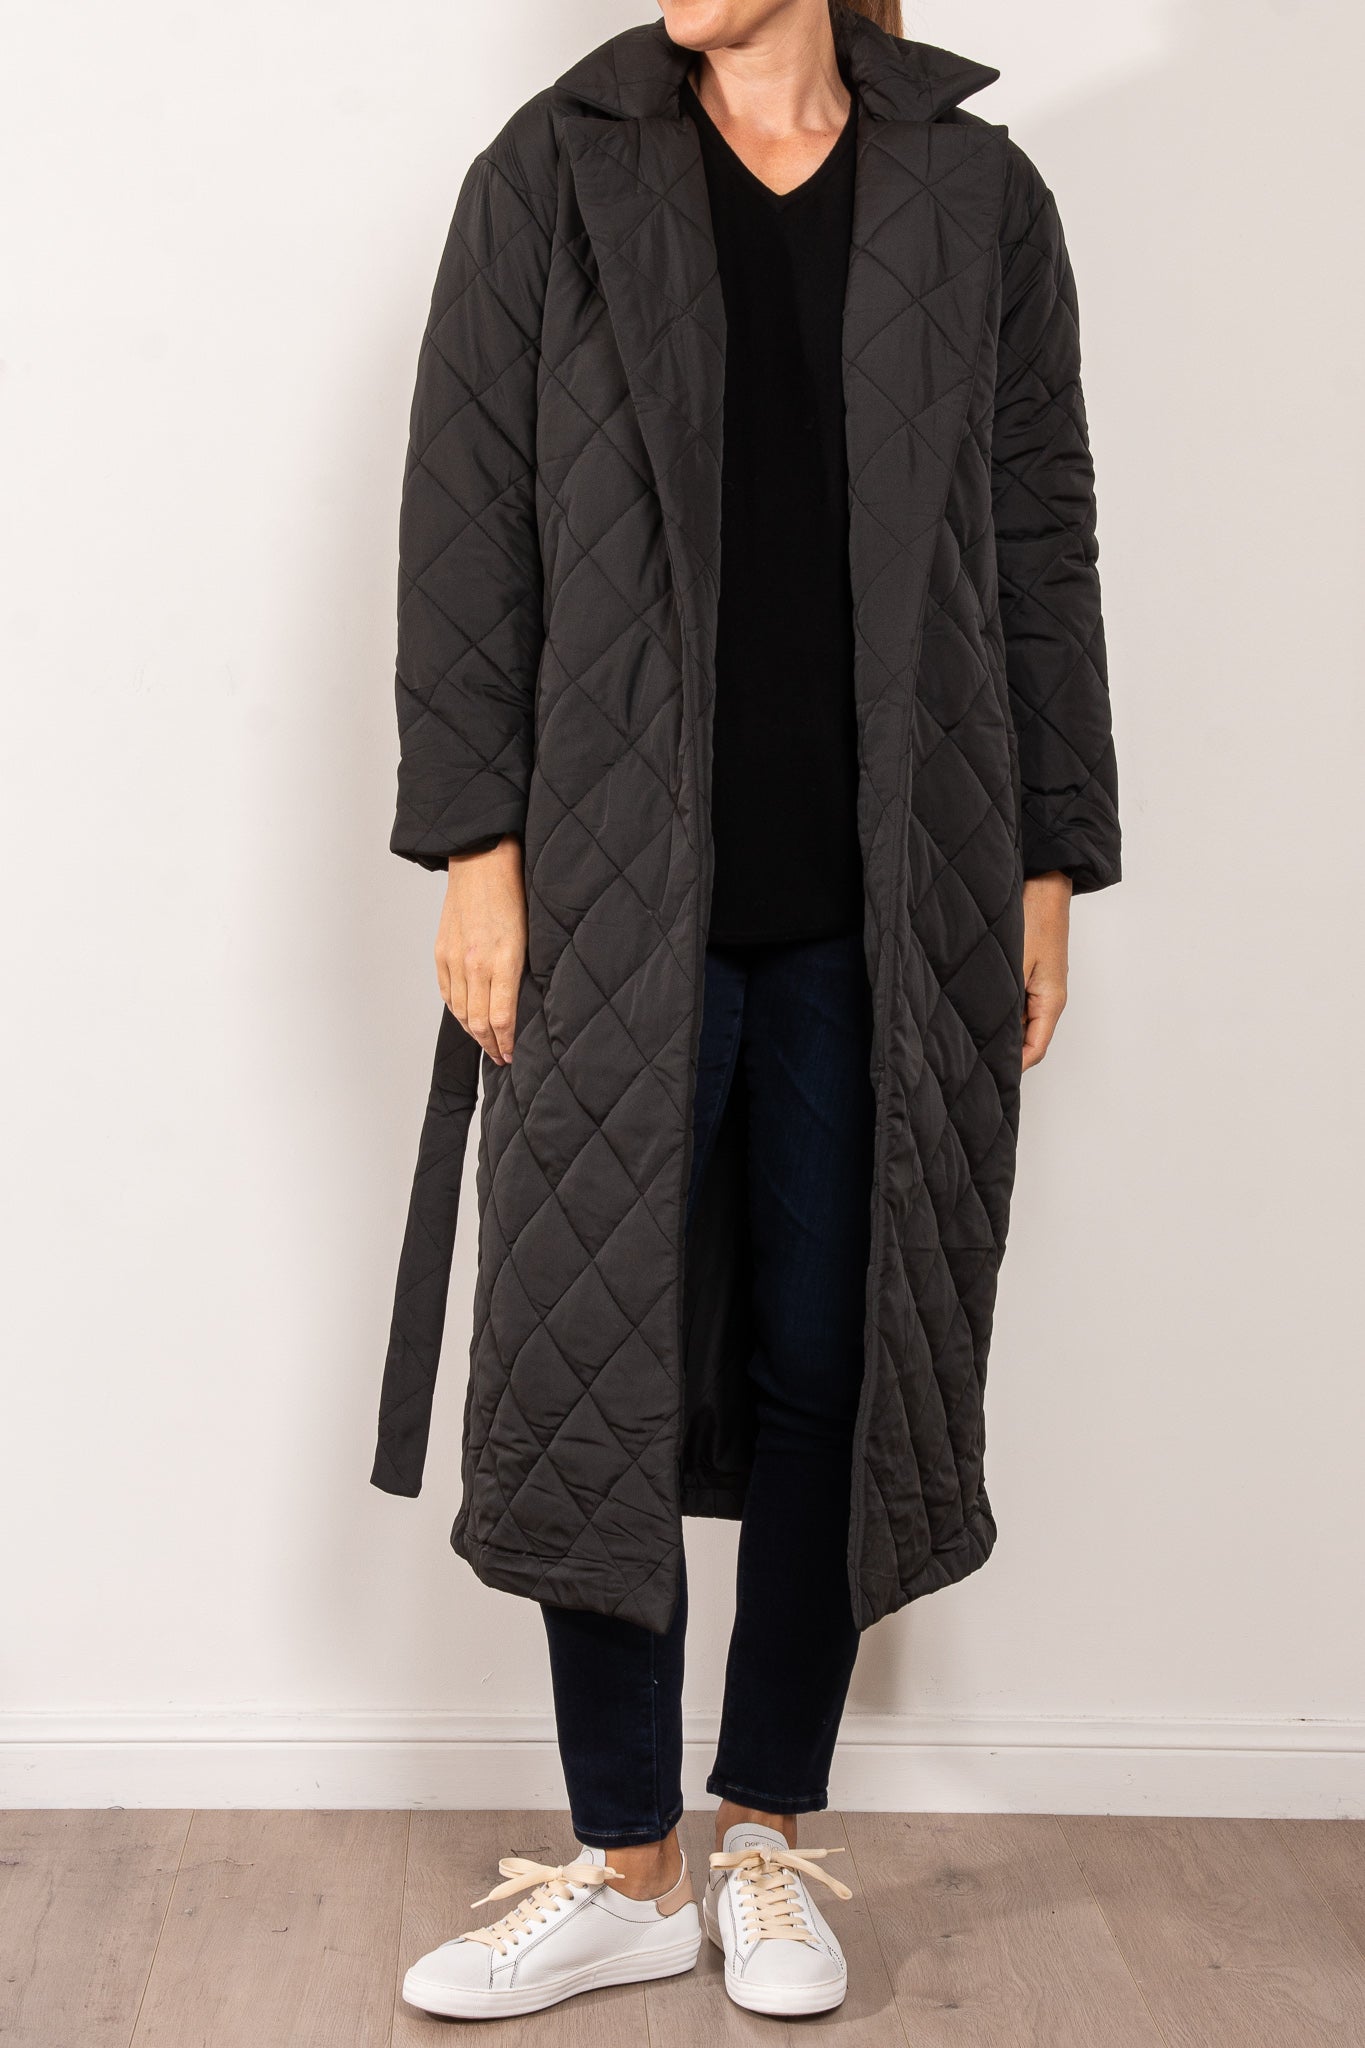 Ena Pelly Mia Longline Quilted Jacket